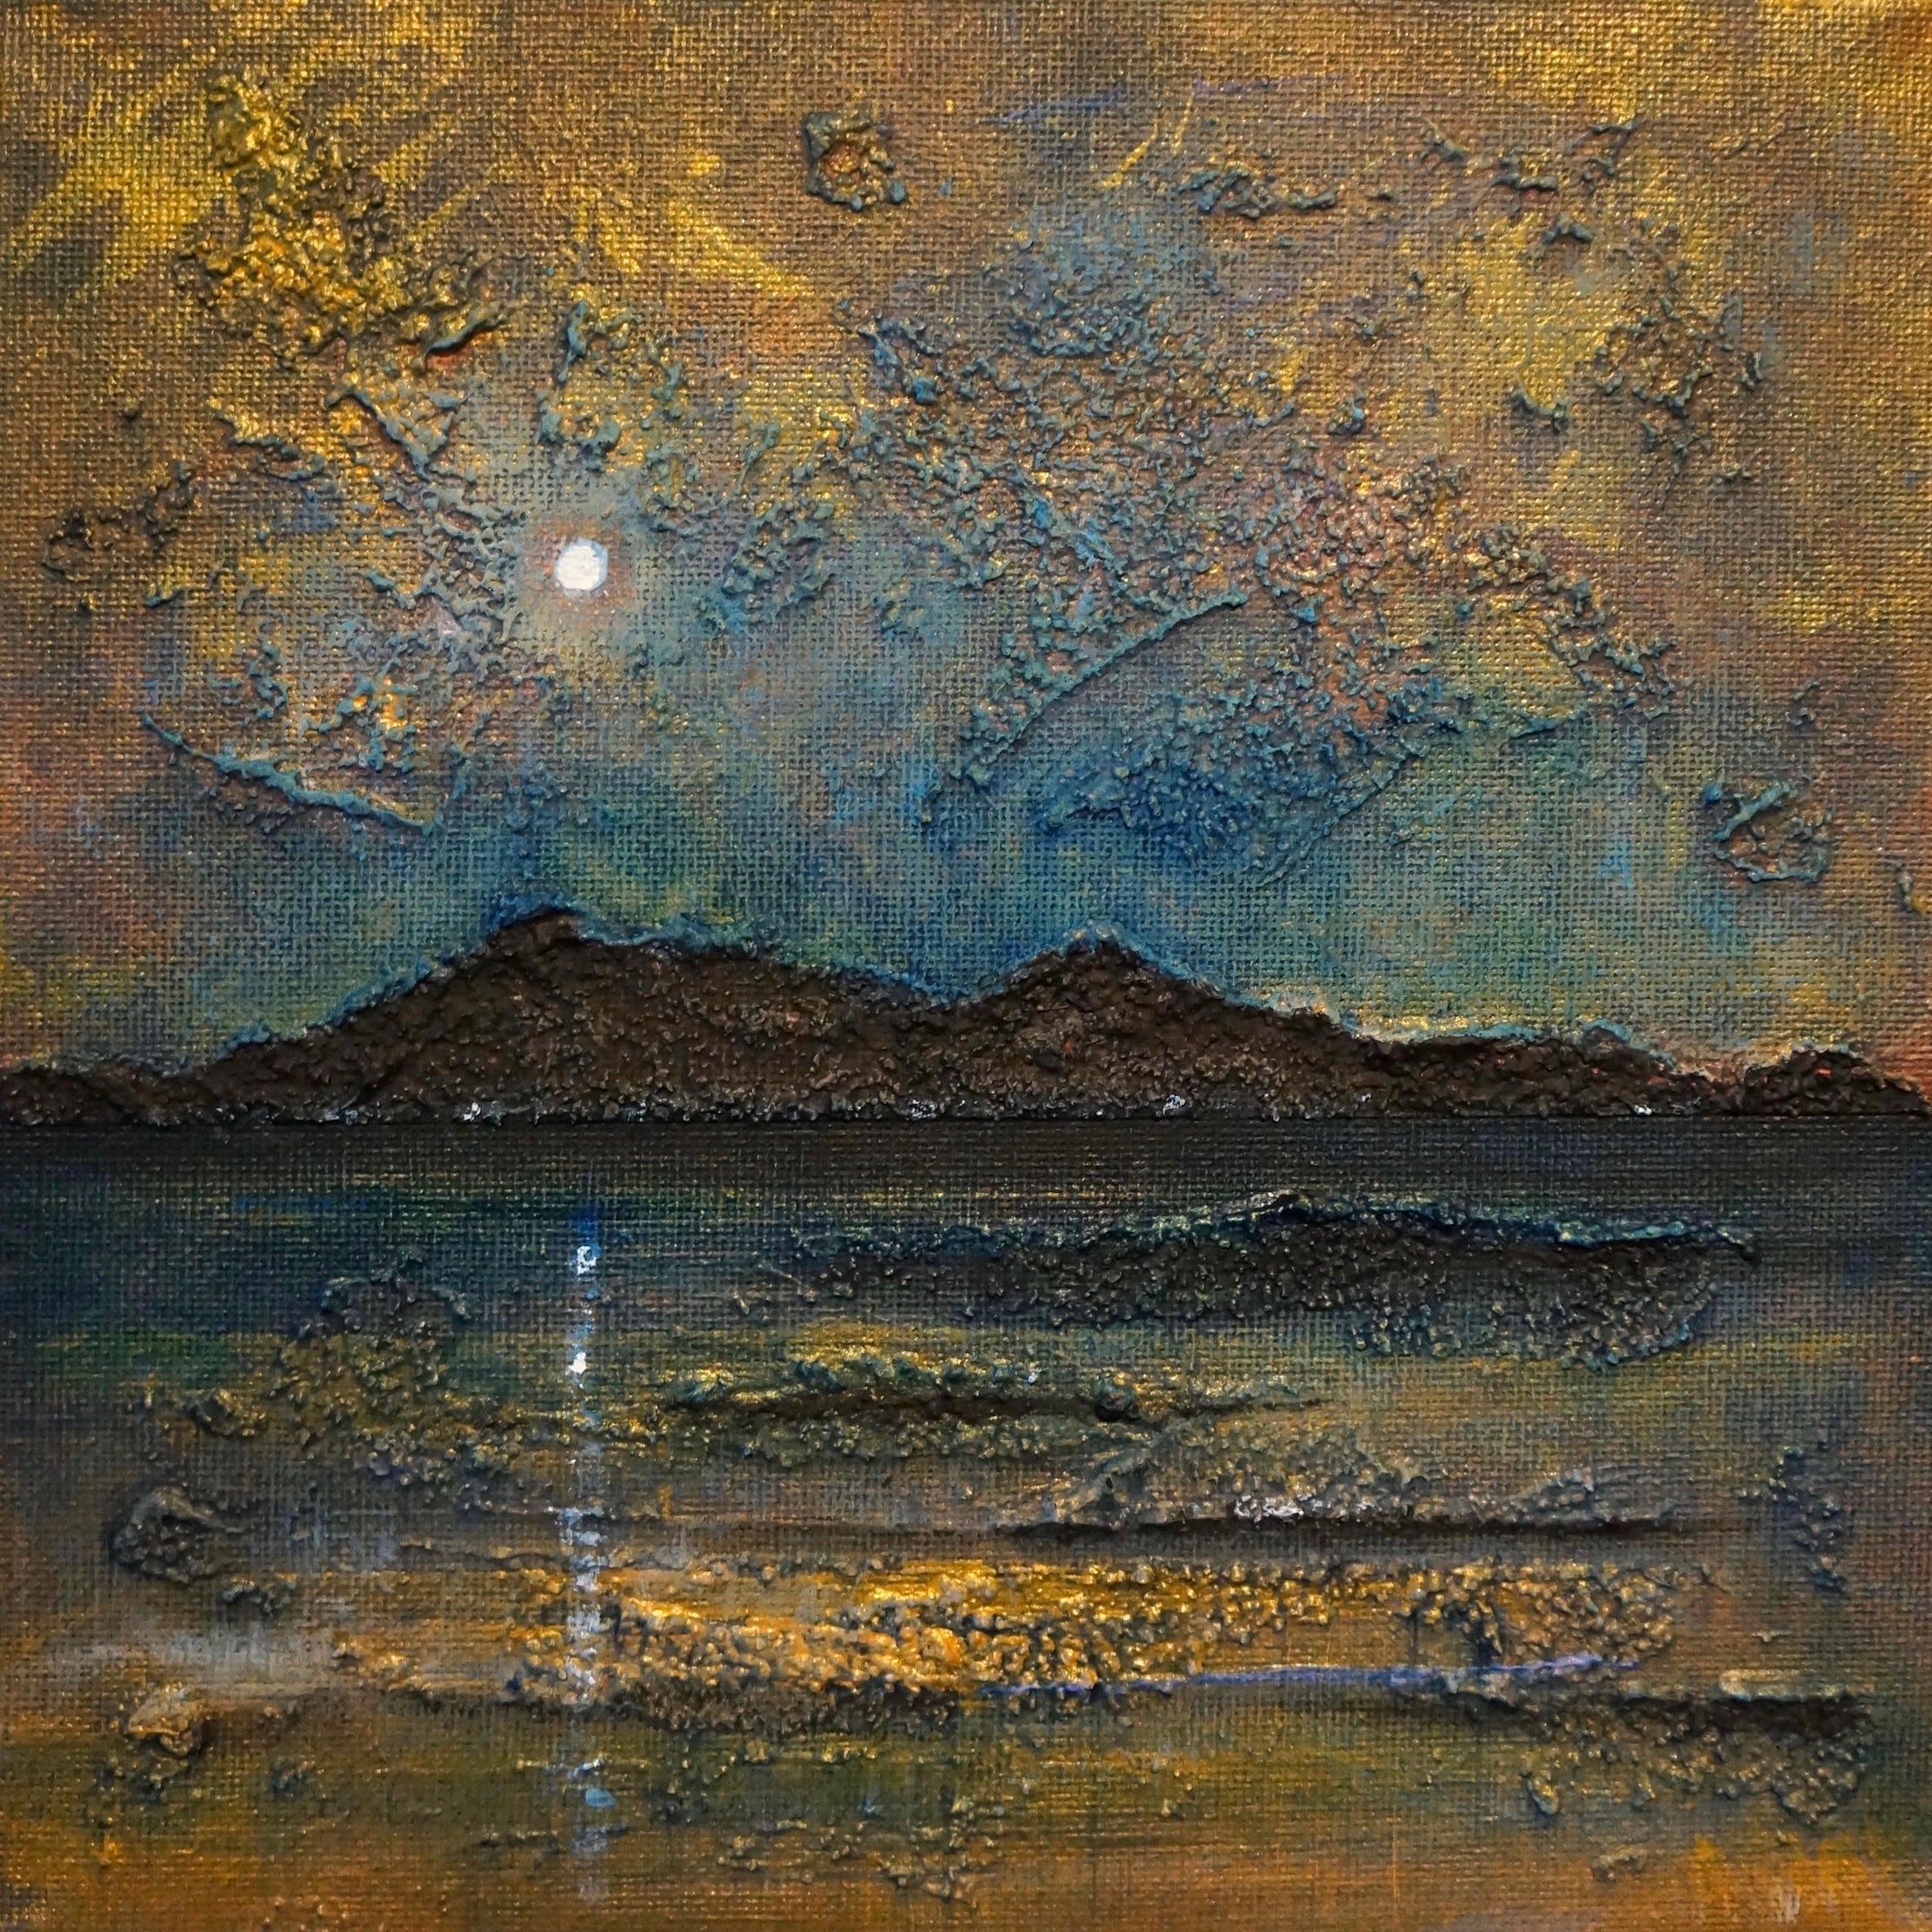 Arran Moonlight | Scotland In Your Pocket Art Print-Scotland In Your Pocket Framed Prints-Arran Art Gallery-Paintings, Prints, Homeware, Art Gifts From Scotland By Scottish Artist Kevin Hunter